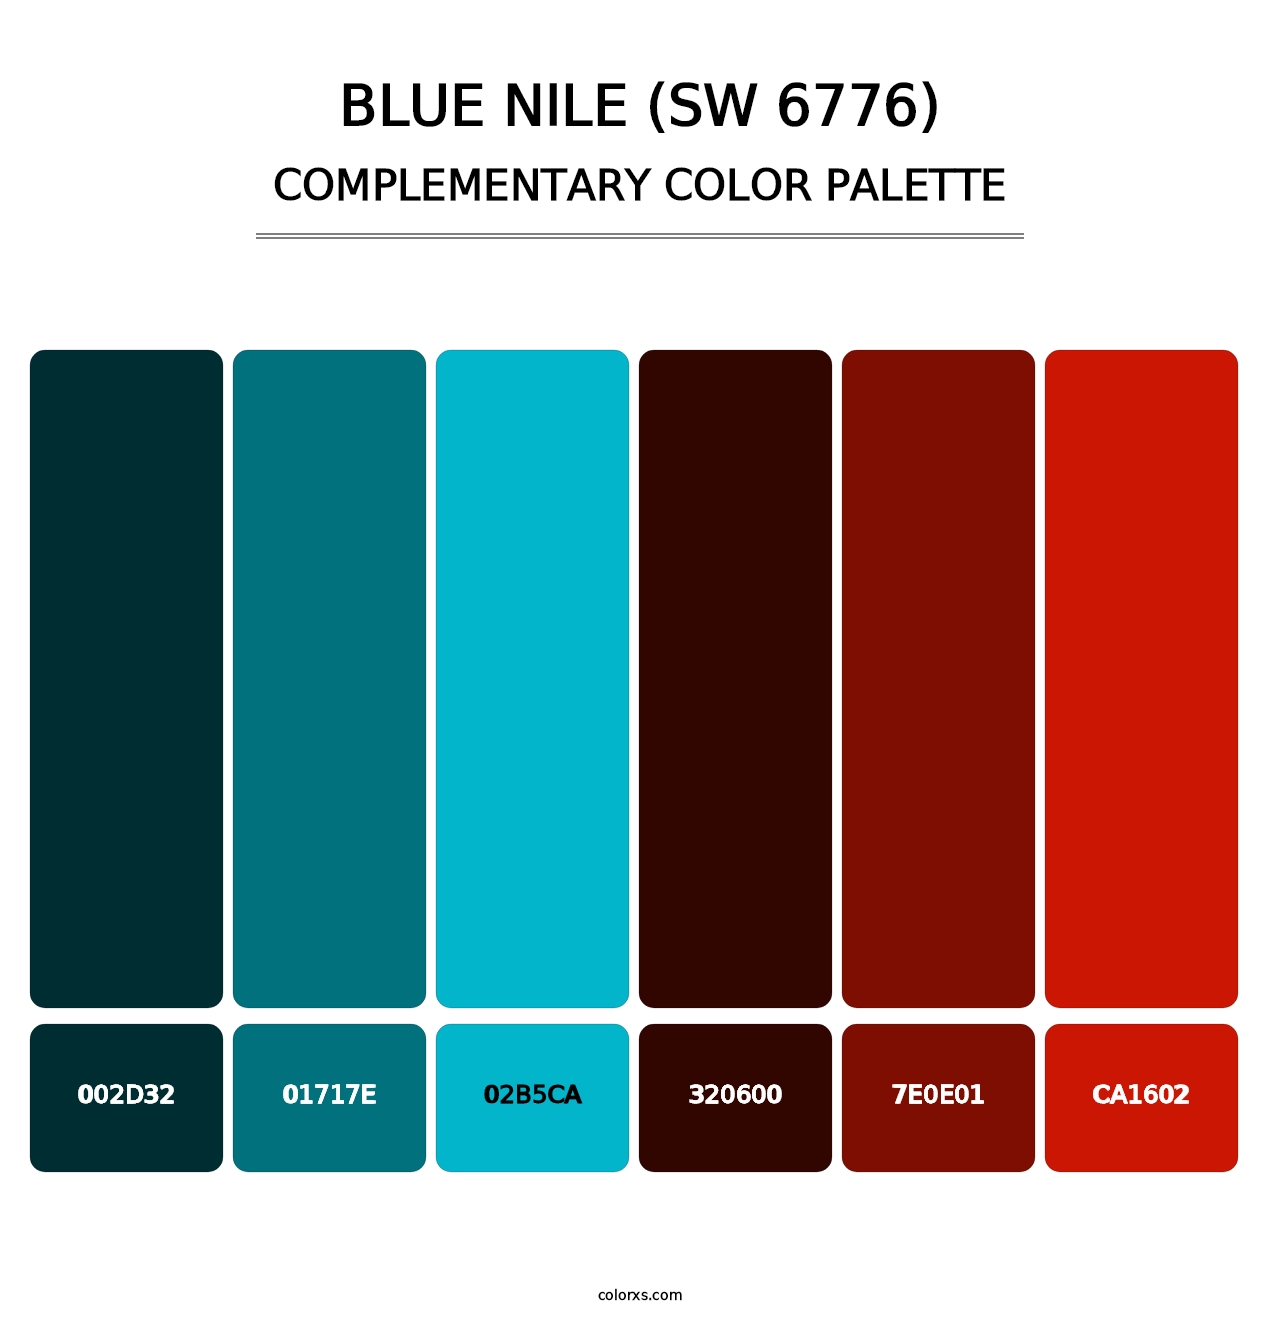 Blue Nile (SW 6776) - Complementary Color Palette